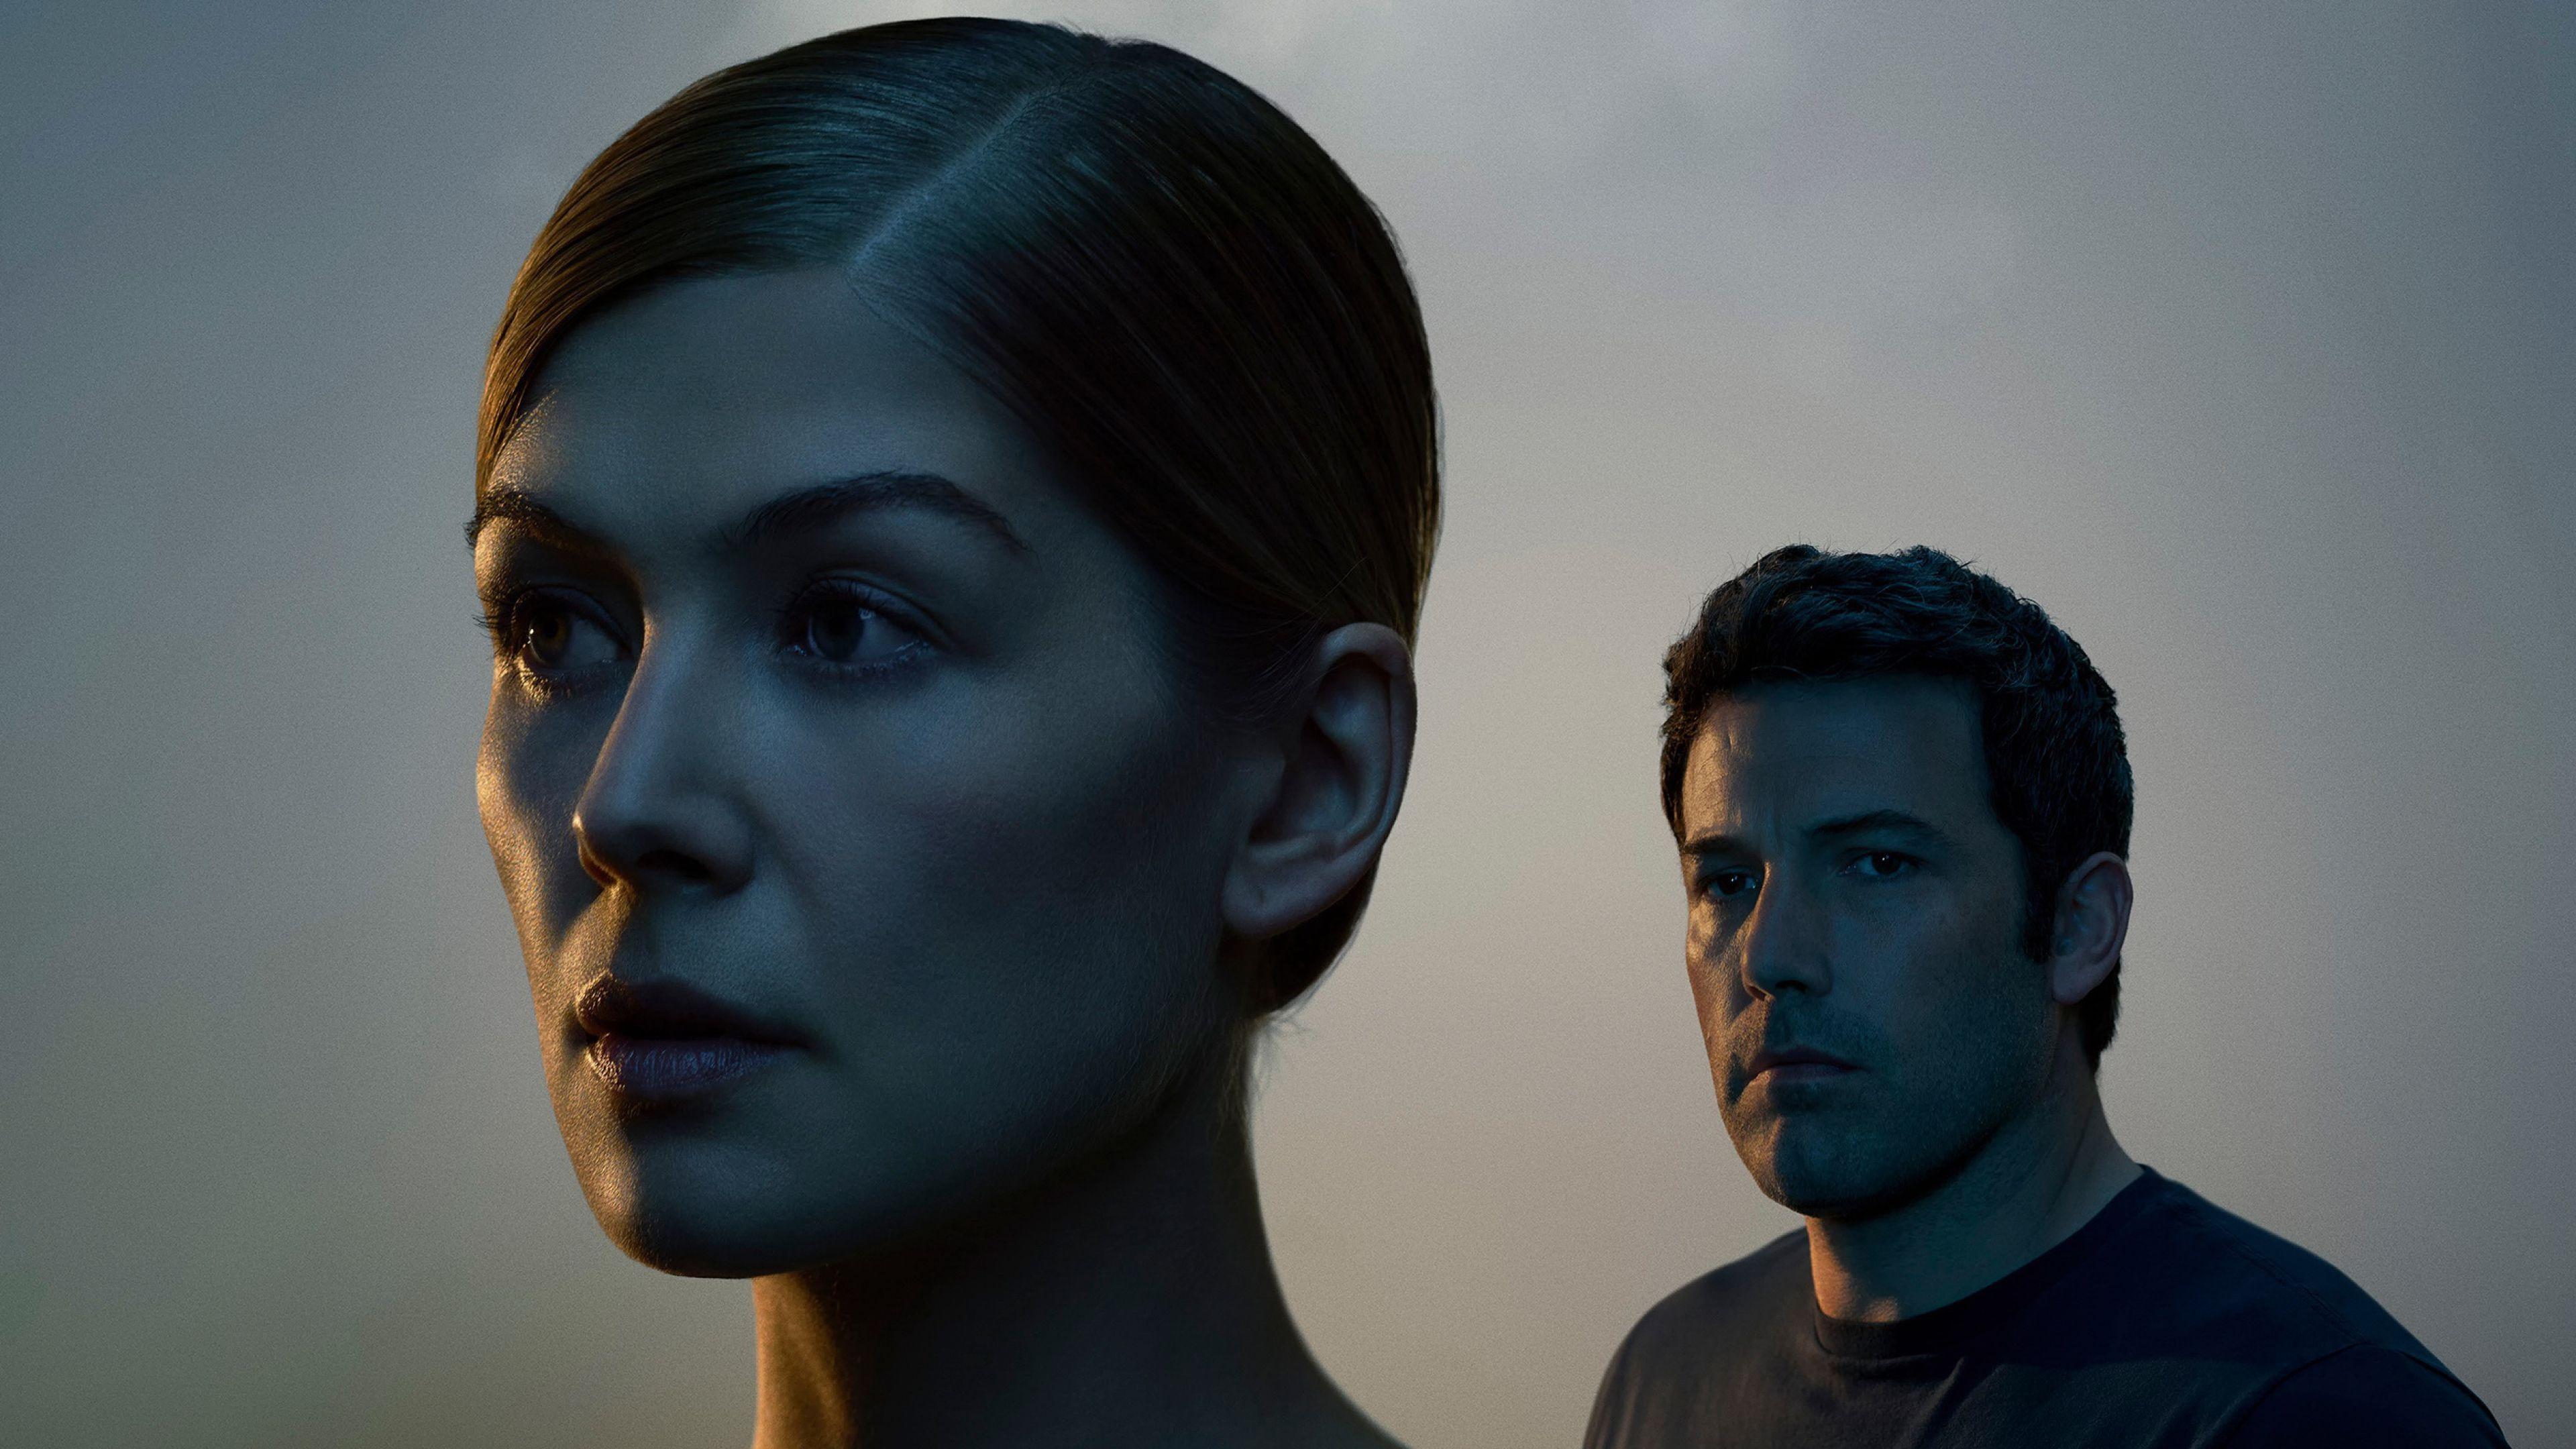 Rosamund Pike In Gone Girl Movie, HD Movies, 4k Wallpaper, Image